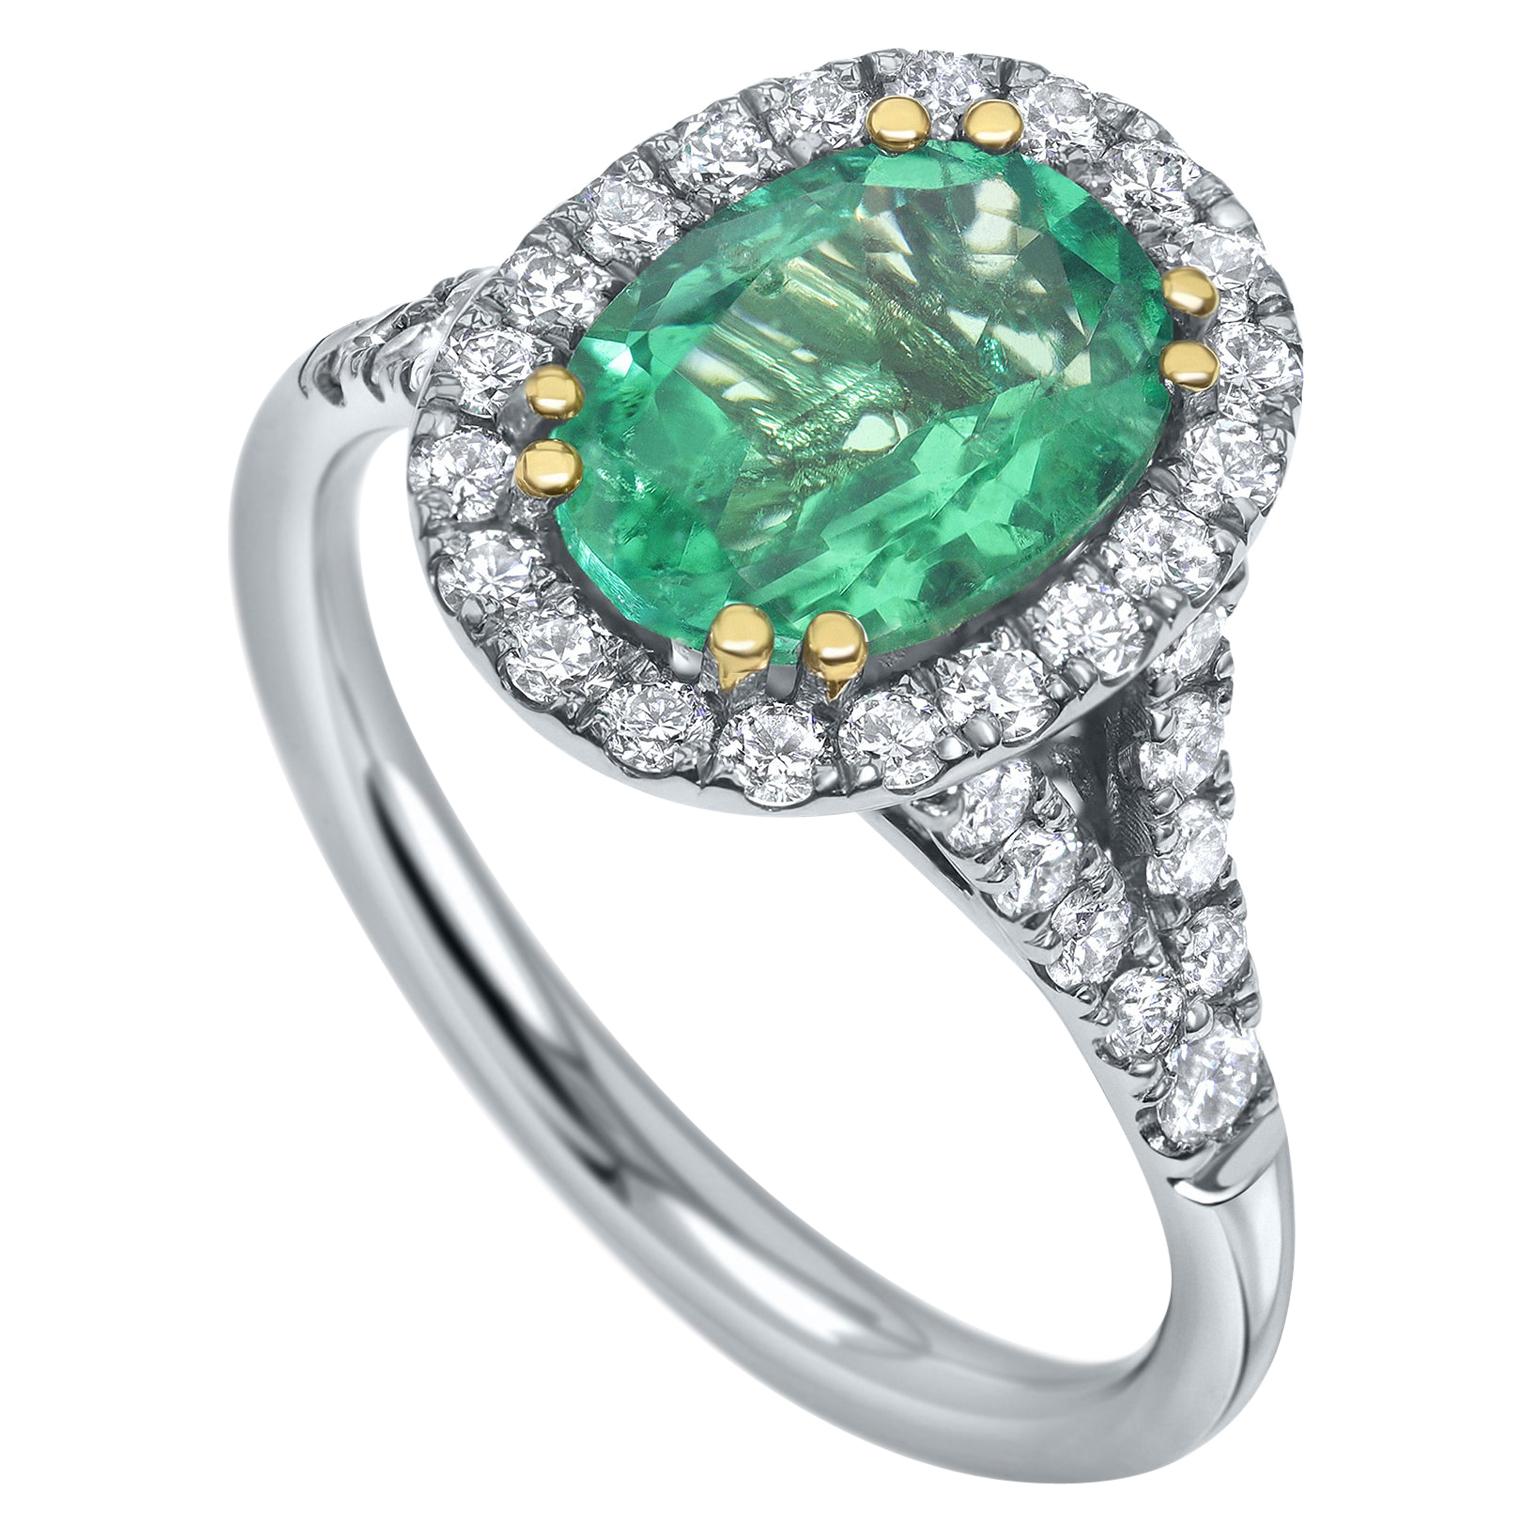 2.39 Carat 100% Natural Afghan Emerald Oval Cut and Diamonds Ring in White Gold For Sale